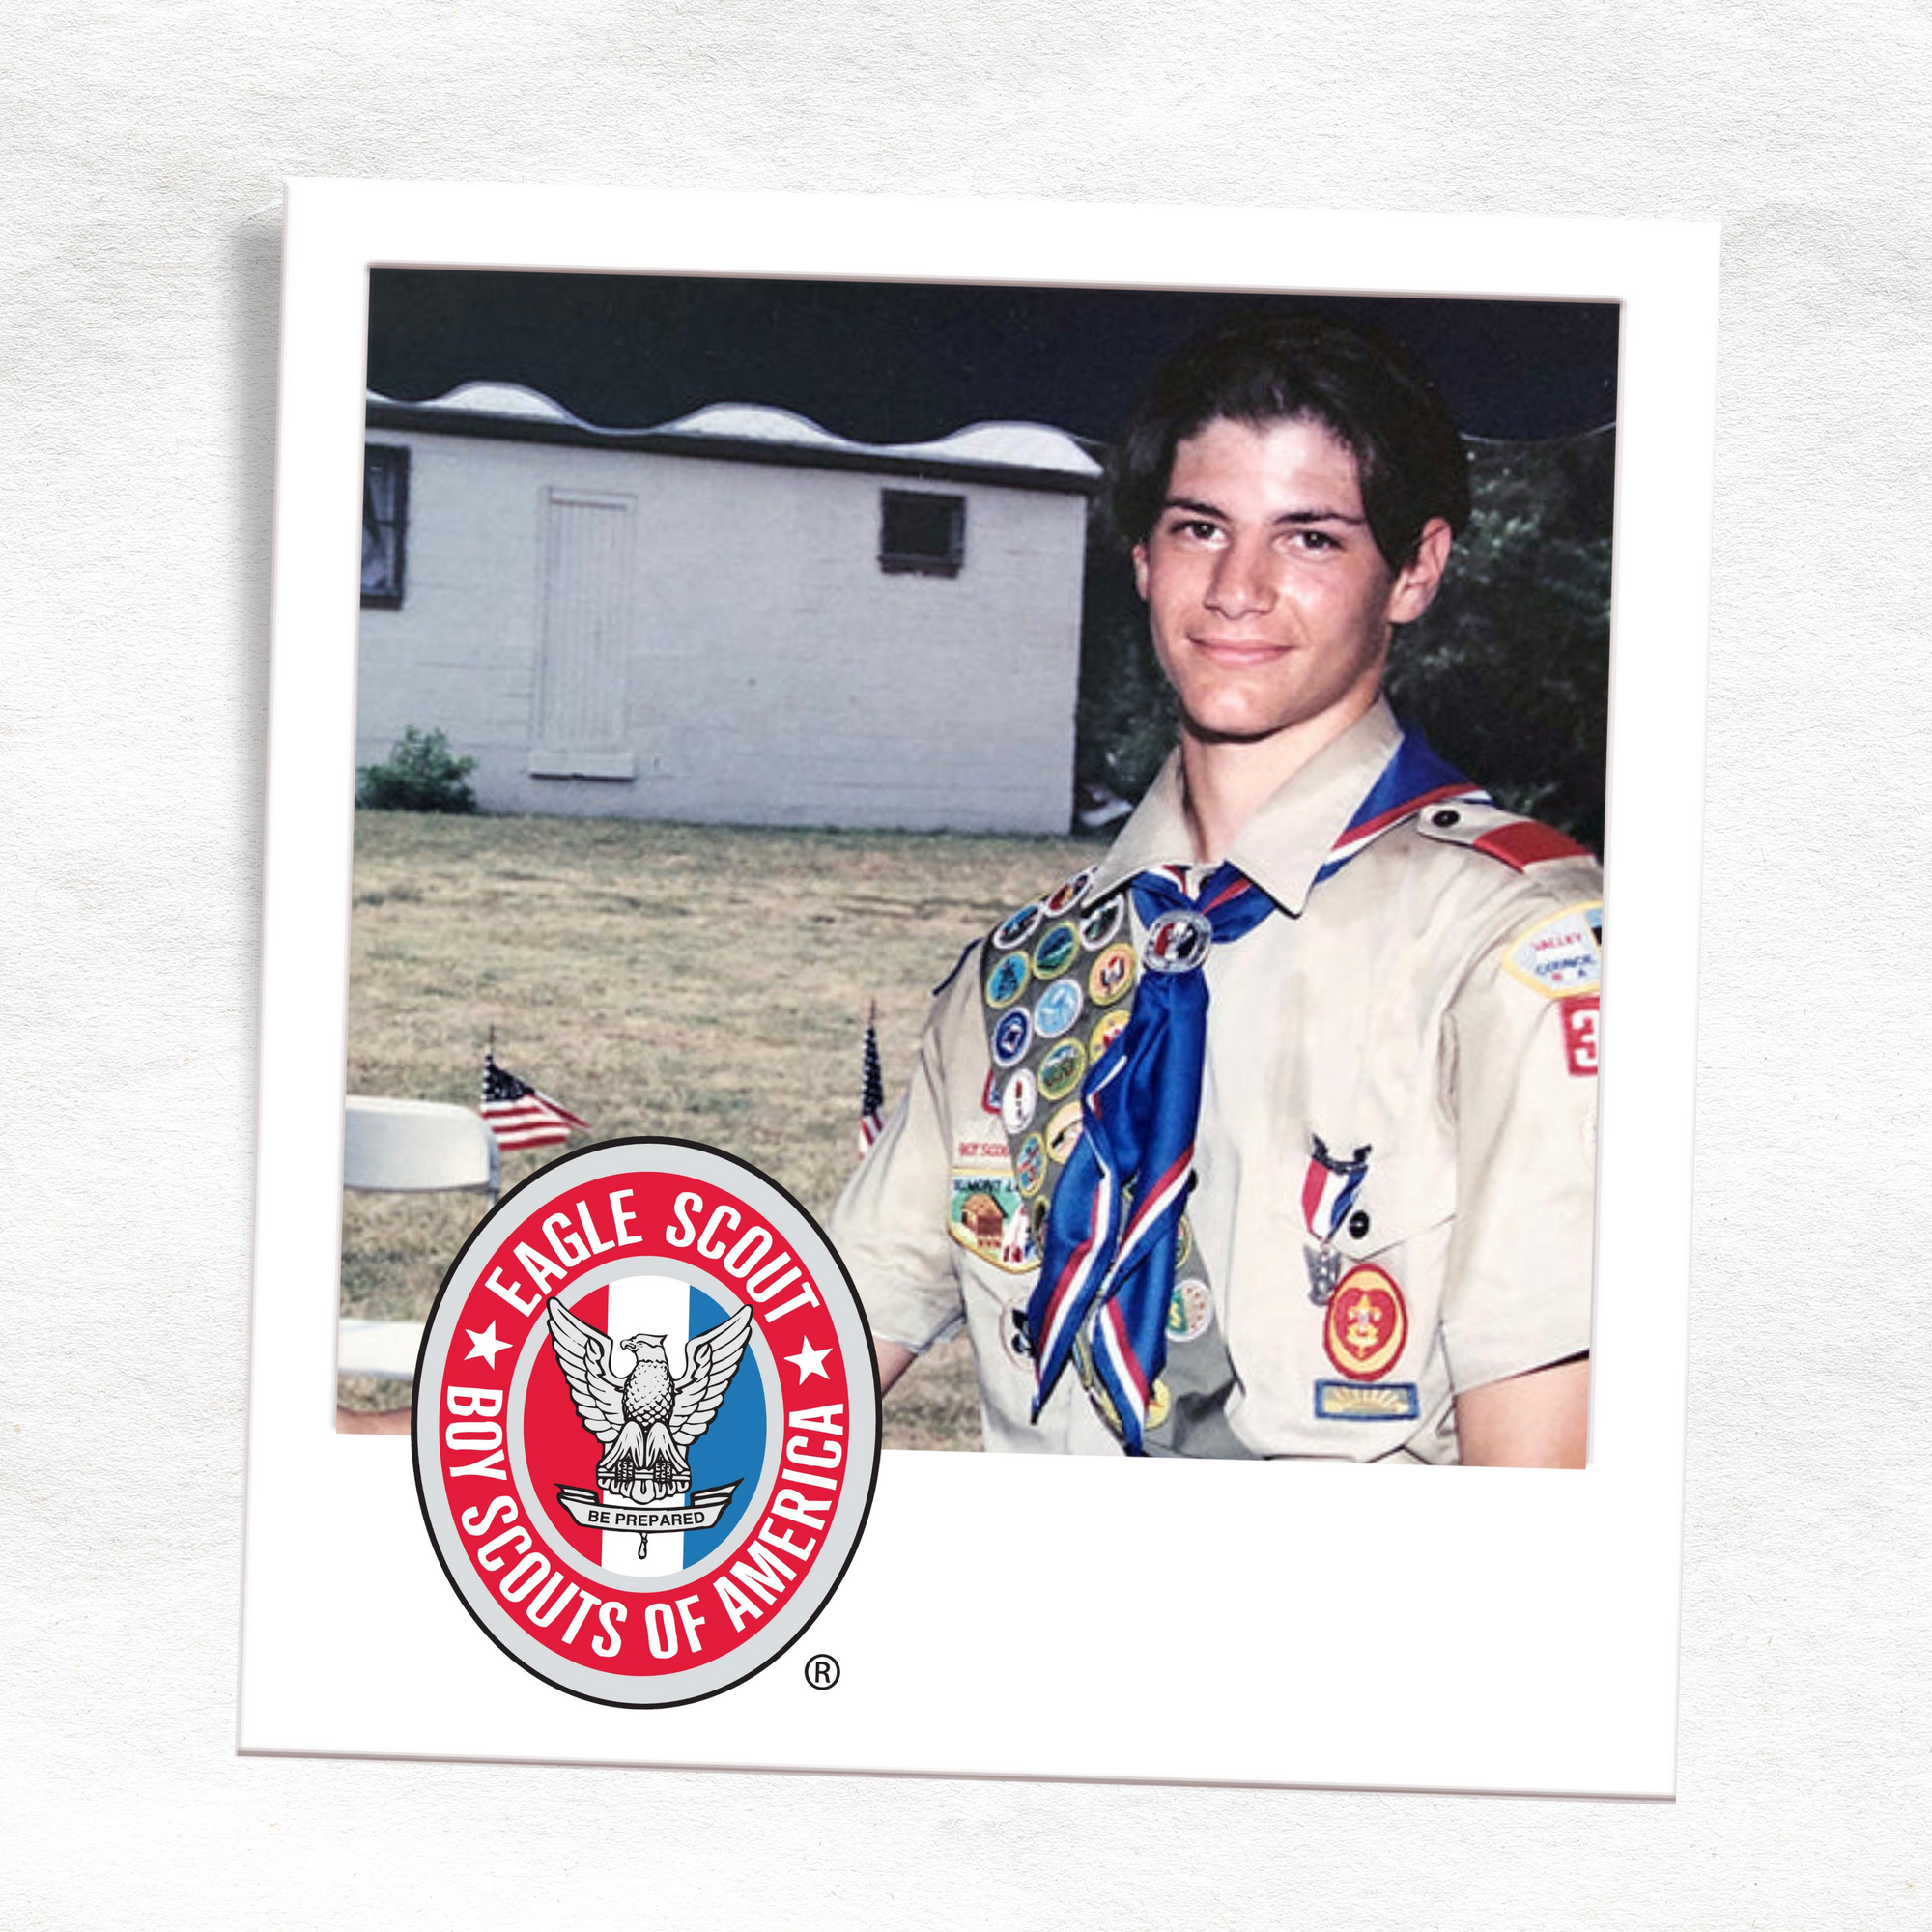 Mike Mogan as an Eagle Scout